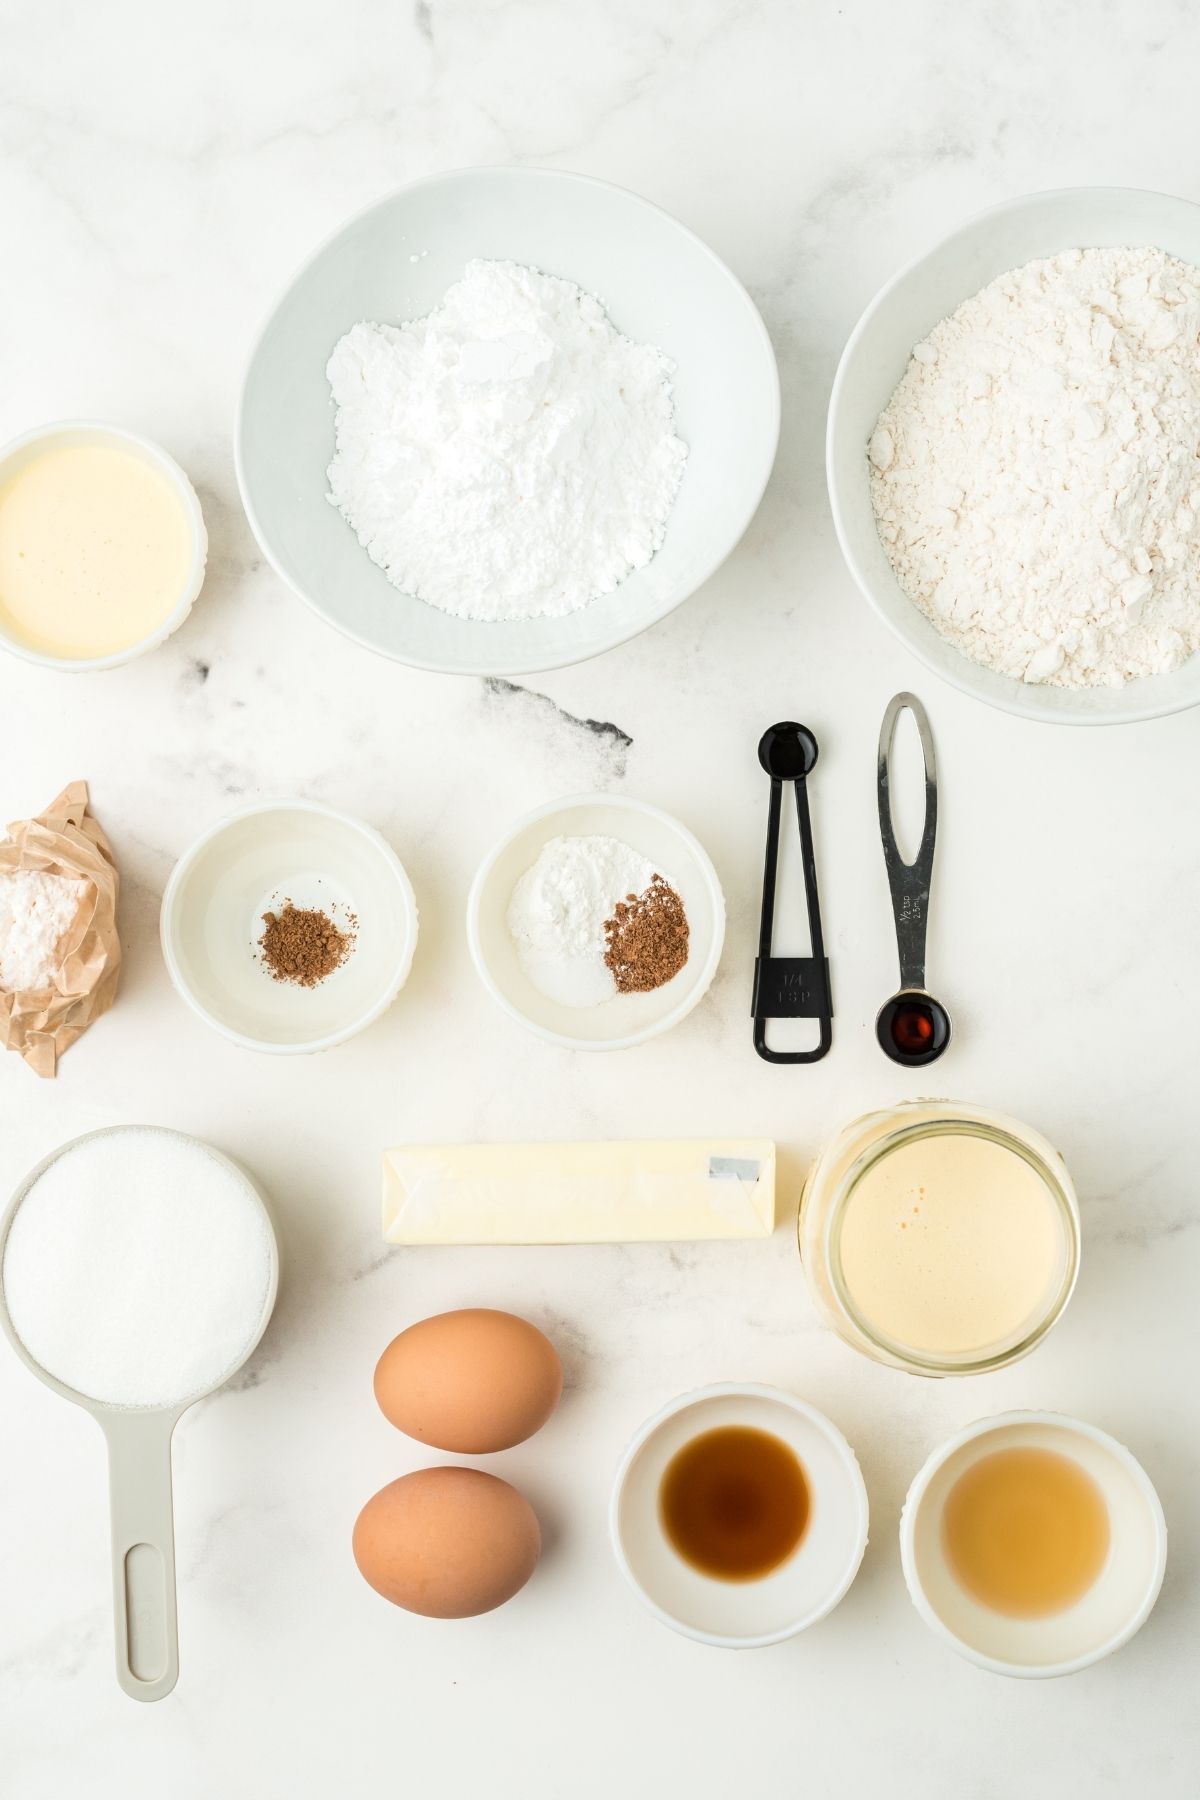 ingredients on white counter: flour, powdered sugar, spices, egg nog, butter, pudding packet, 2 brown eggs, rum extract, vanilla extract, sguar